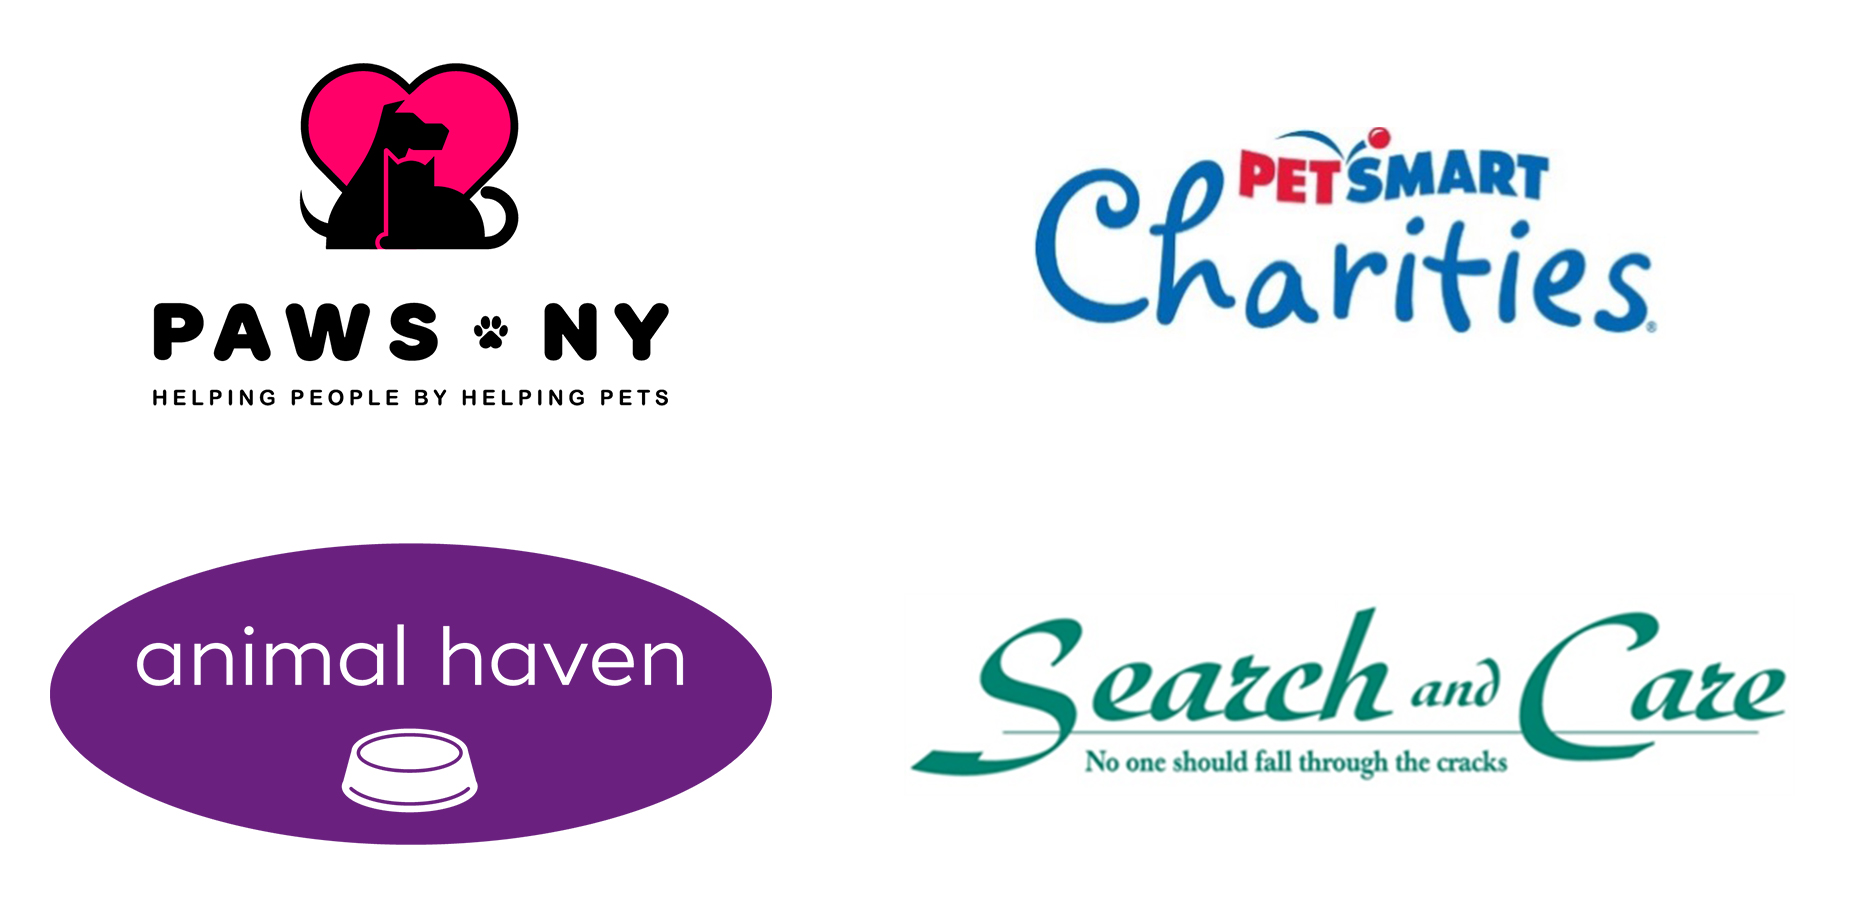 PAWS NY, Animal Haven and Search and Care Receive Three-Year $400,000 Grant from PetSmart Charities® to Help Keep Pets and People Together